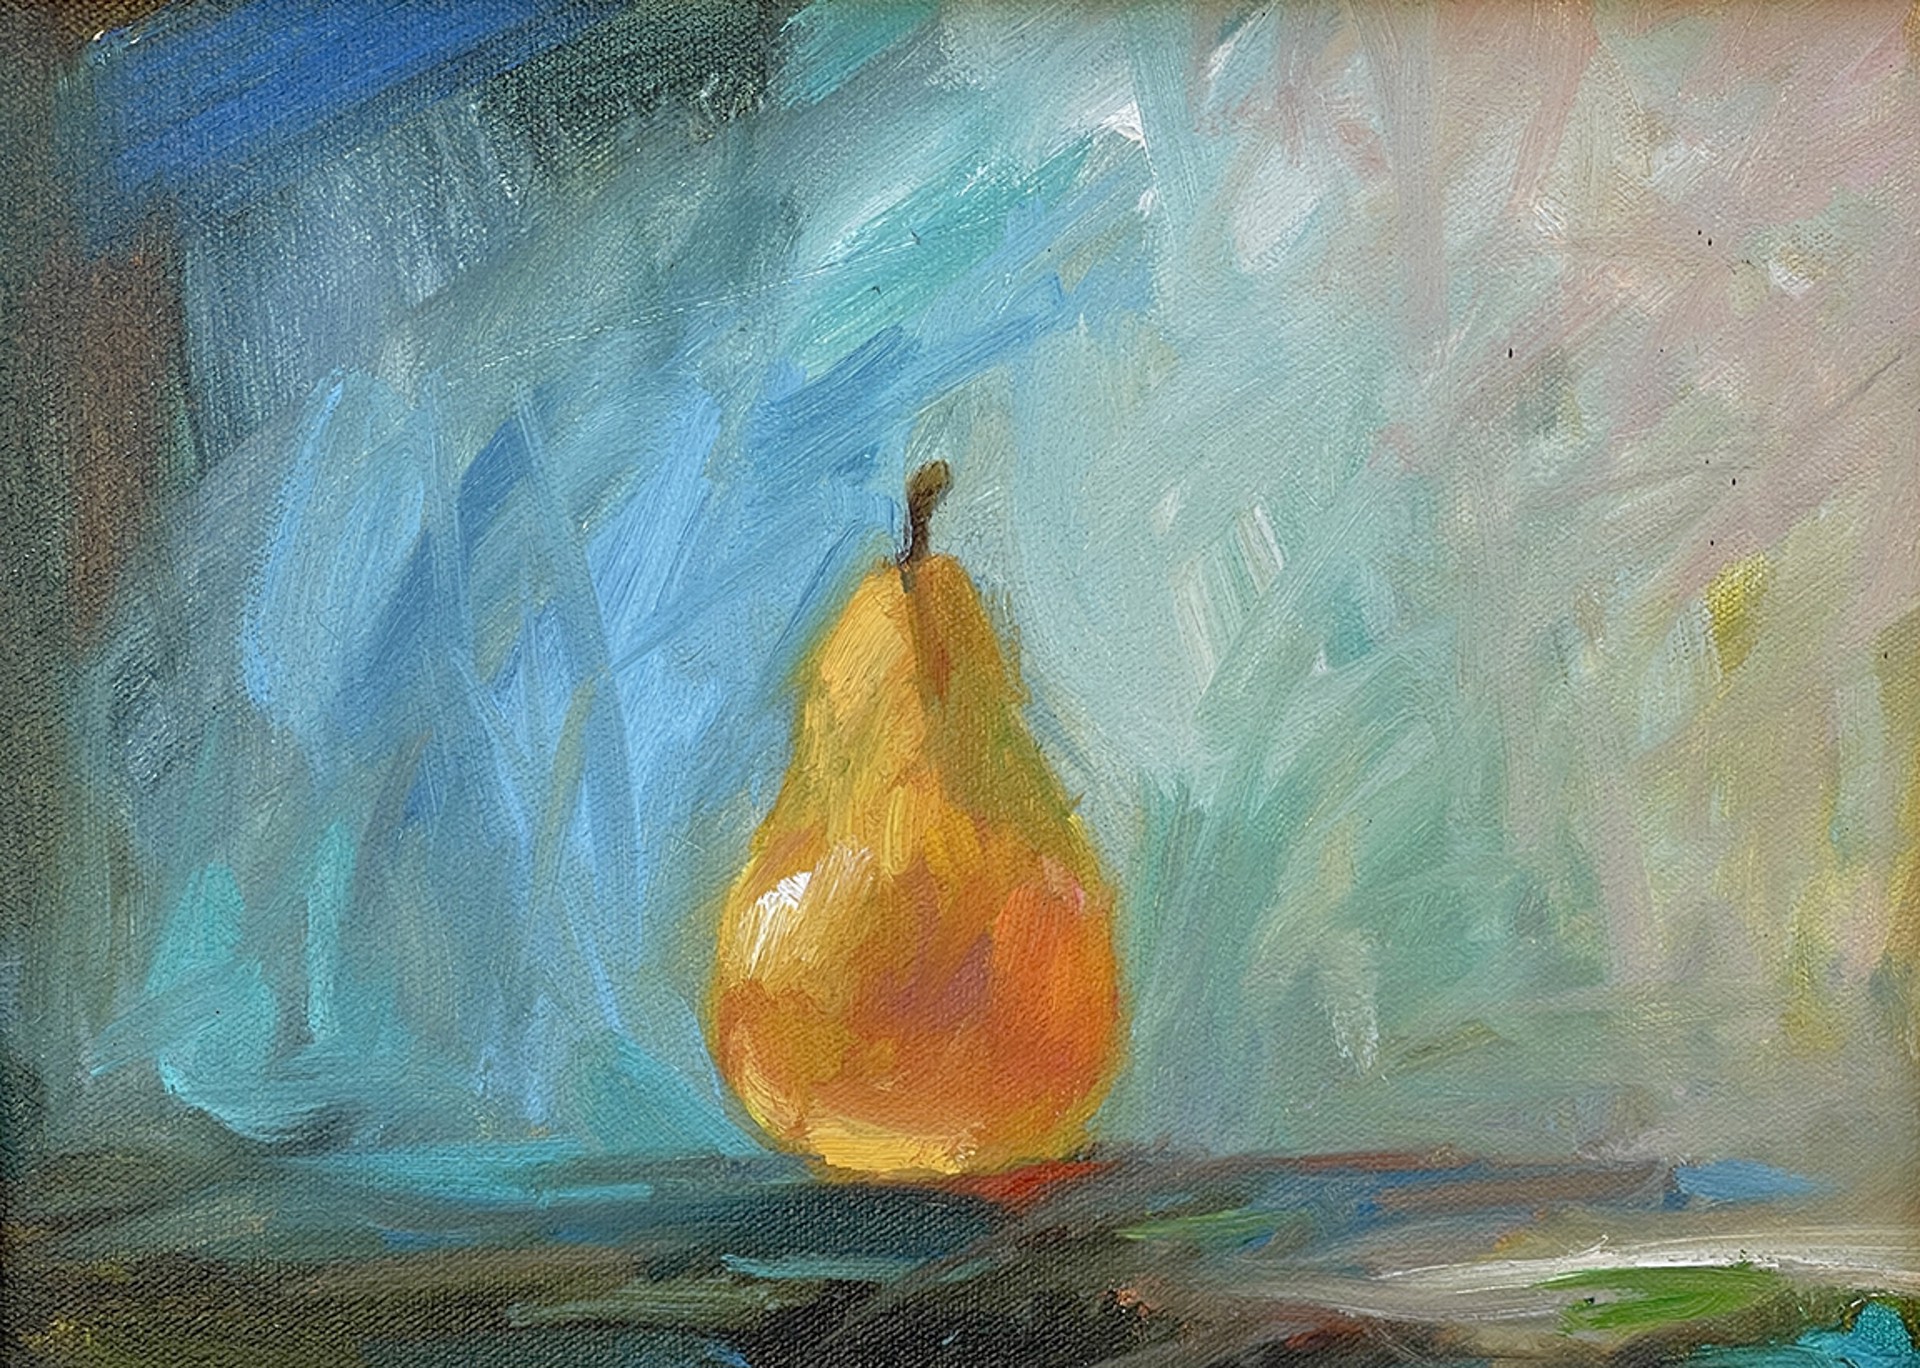 A Special Pear by Joe Tanous